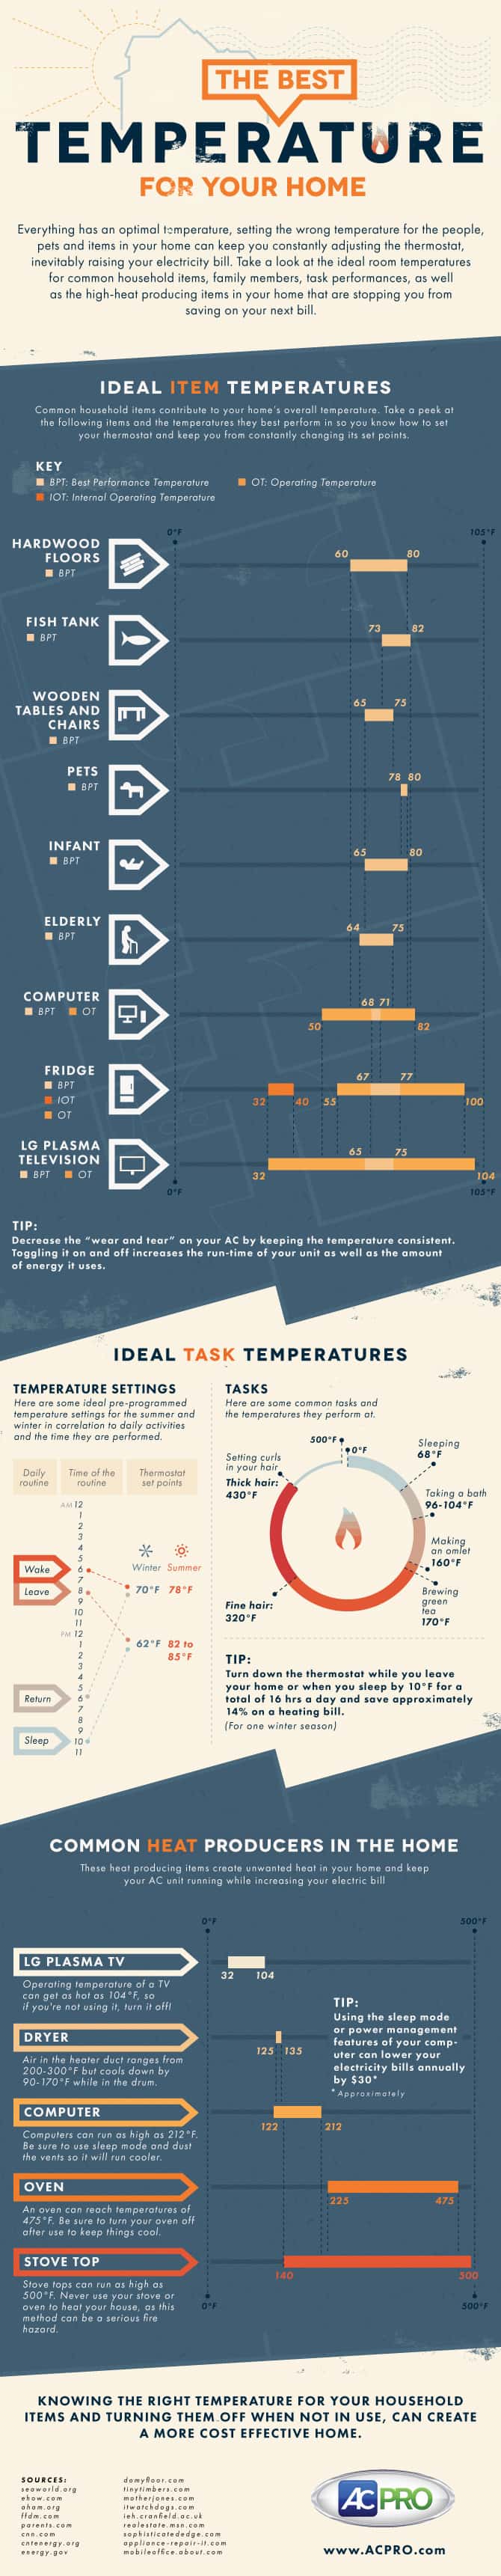 Best Temperature for Your Home Infographic